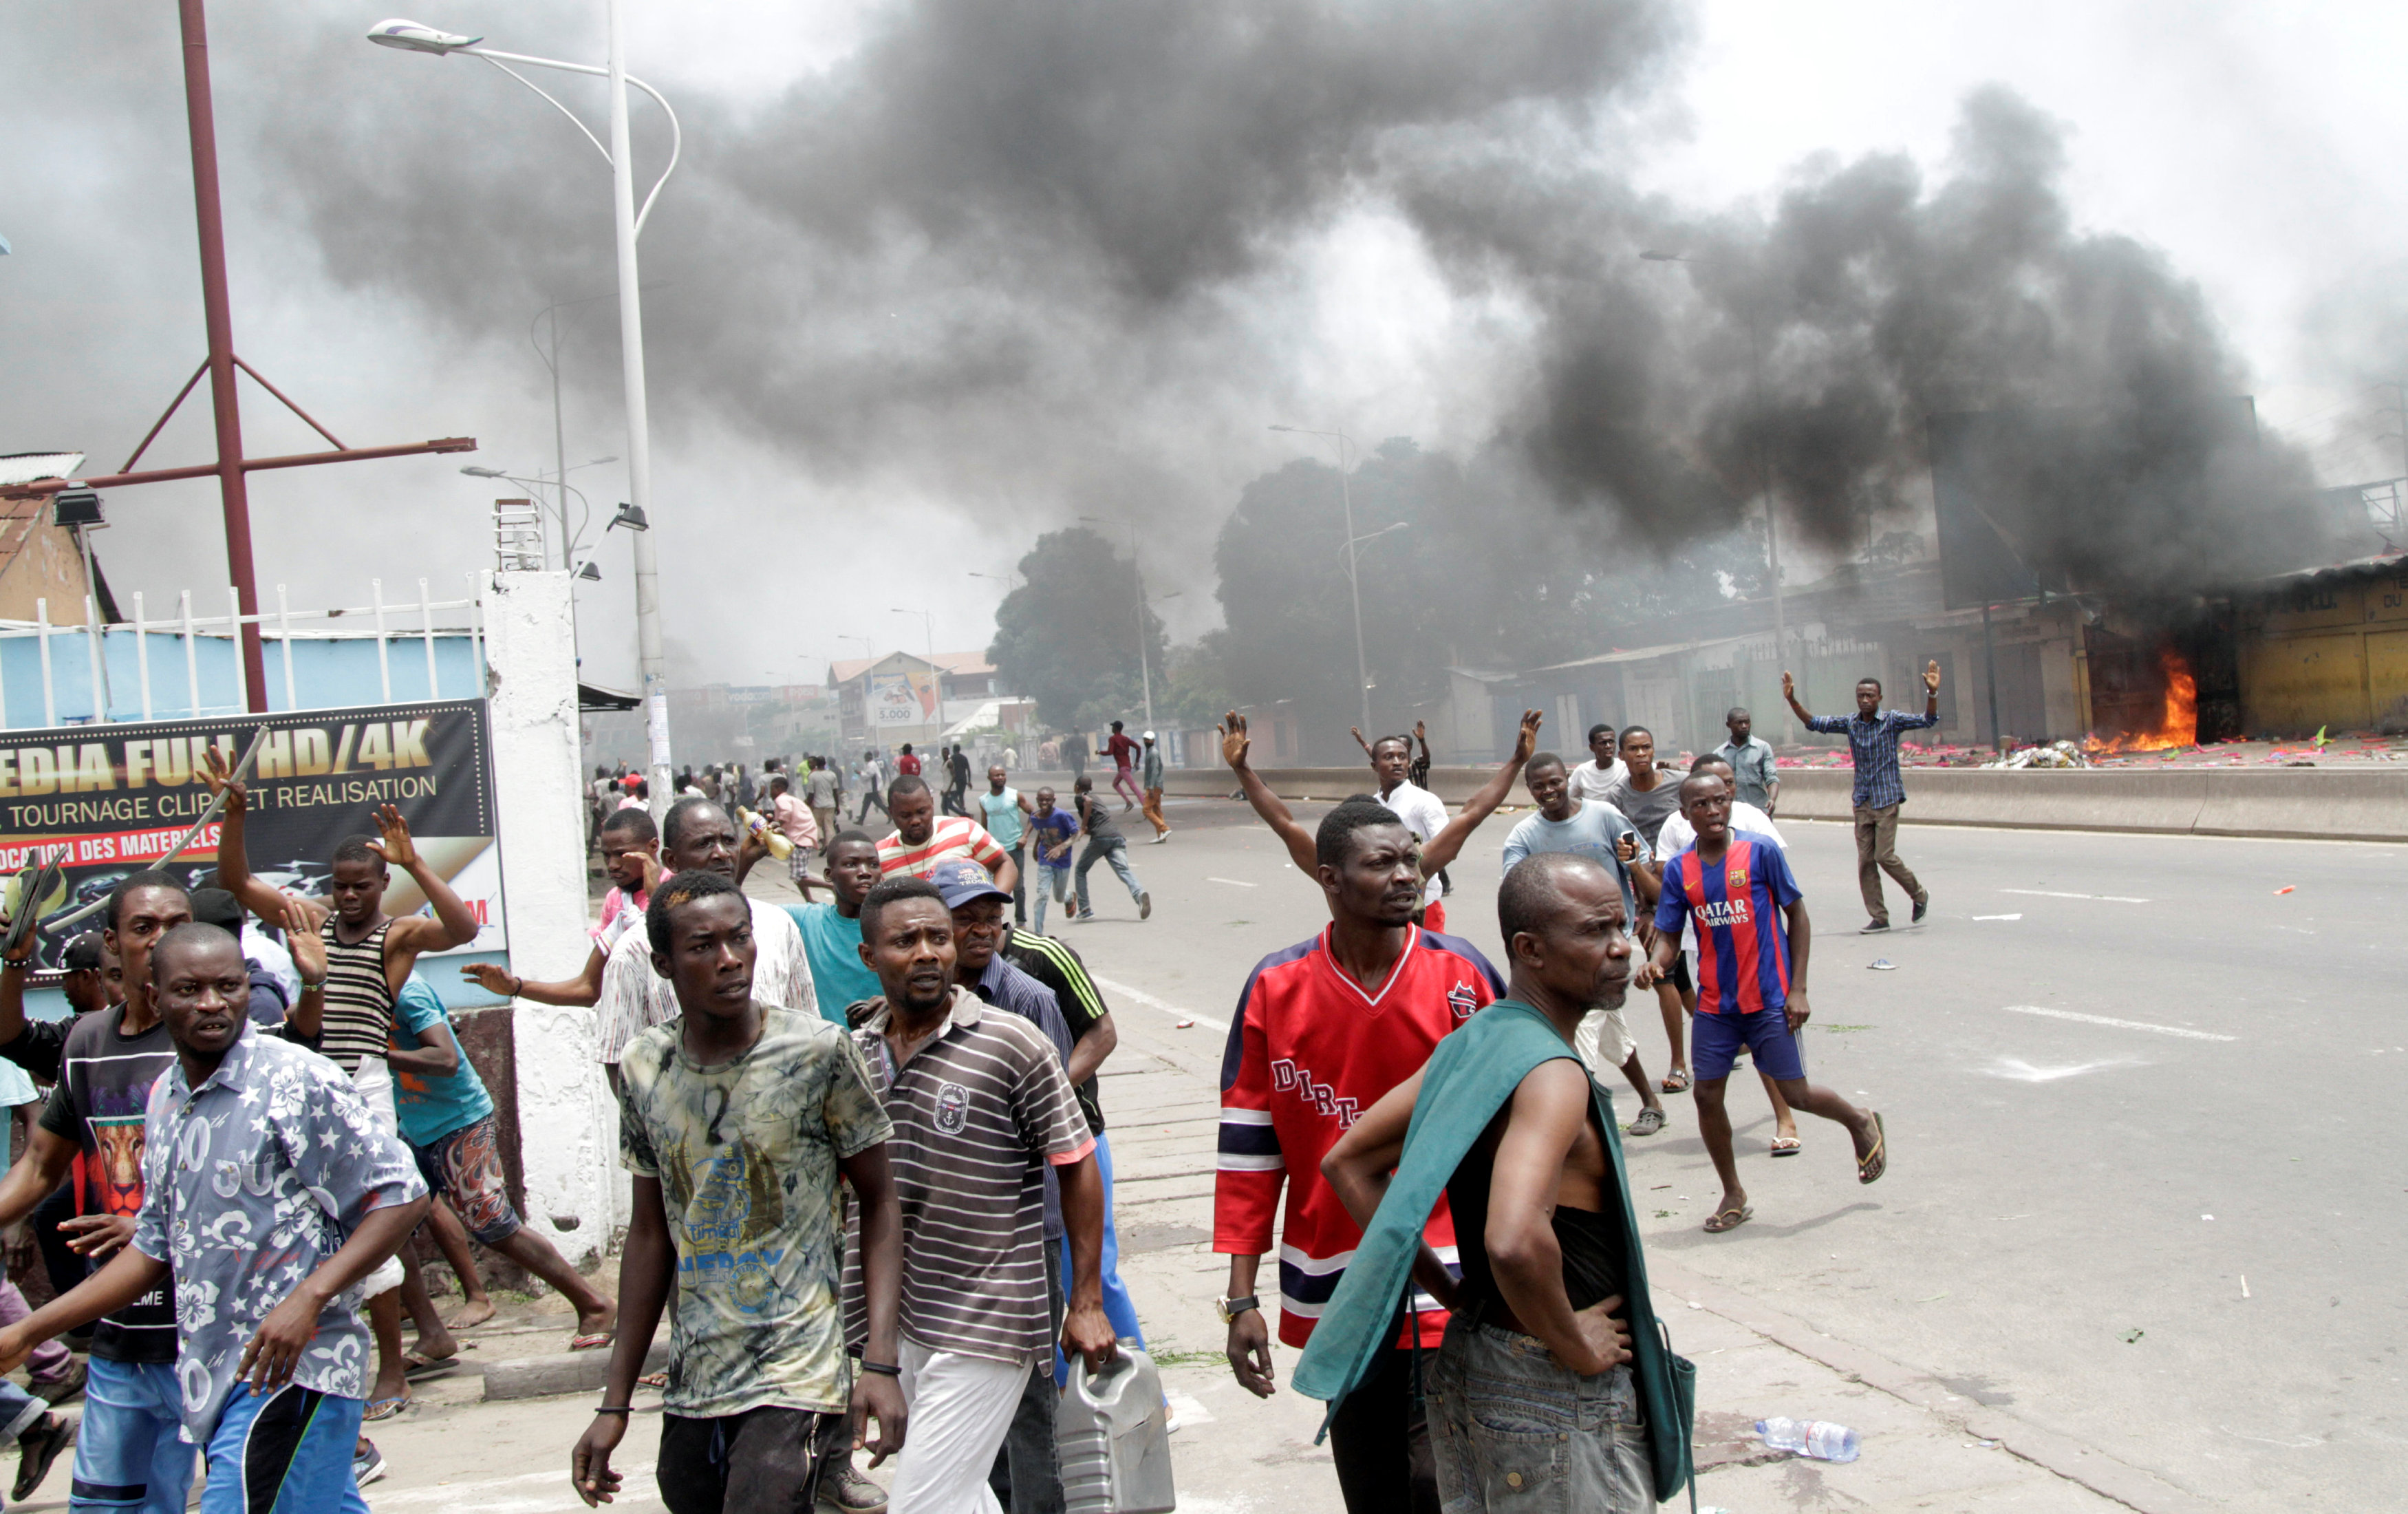 Anti-government march turns violent in Congo capital, 17 killed